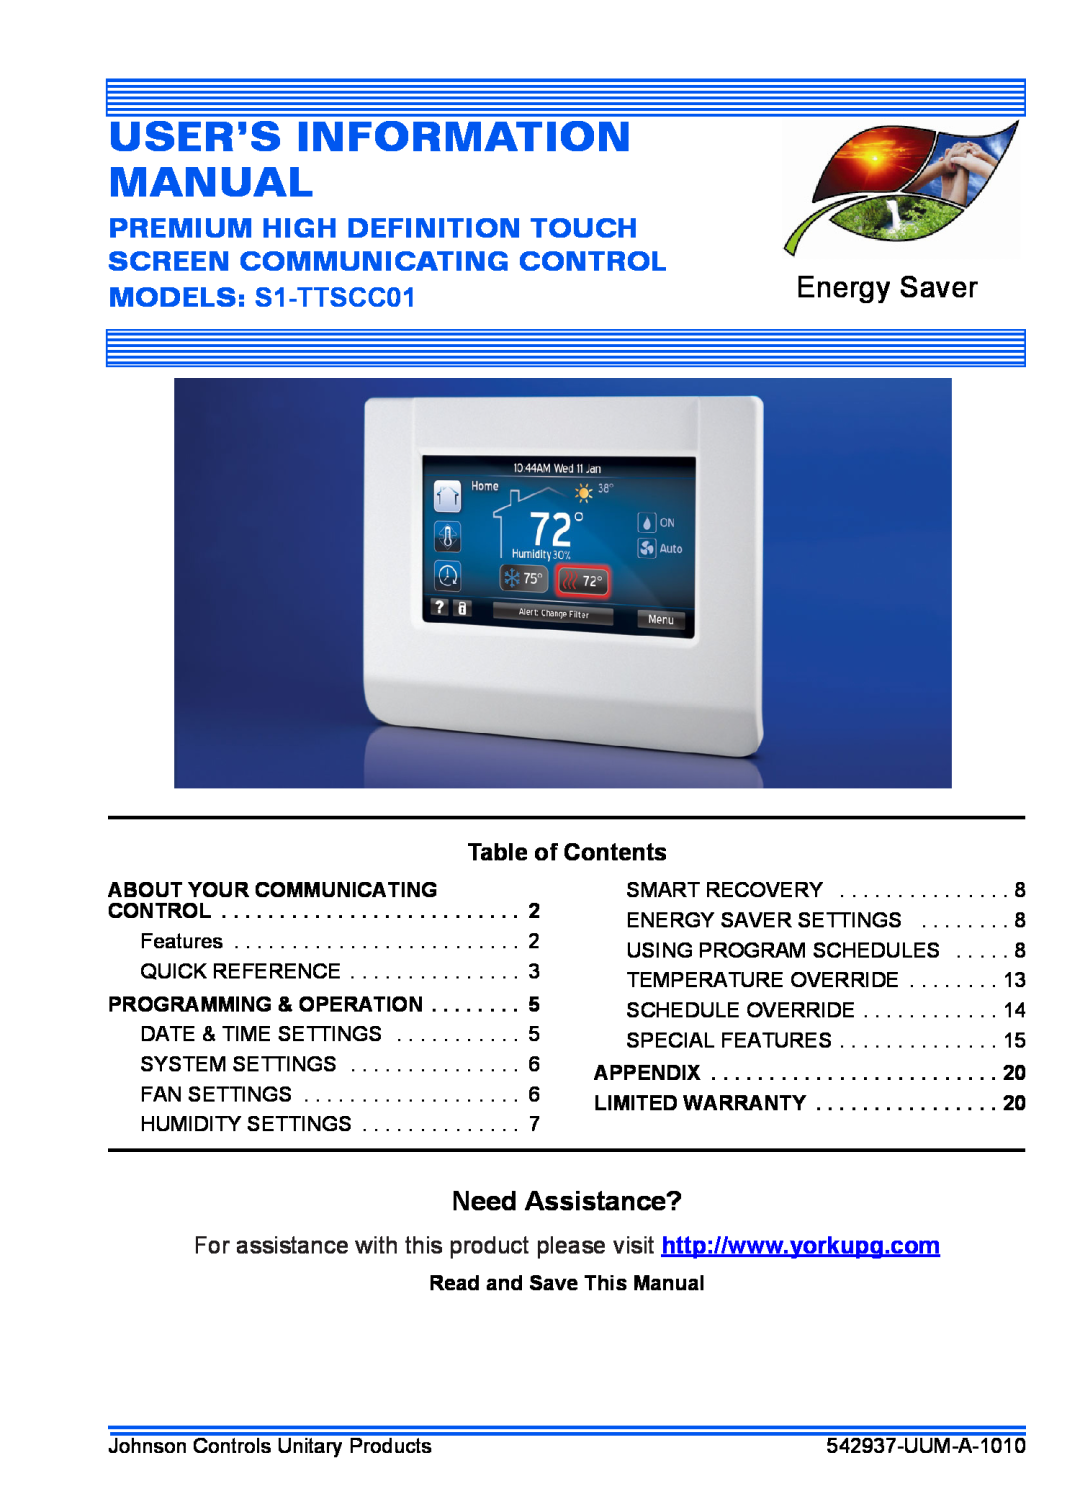 Johnson Controls S1-TTSCC01 appendix Need Assistance?, Table of Contents, Read and Save This Manual, Energy Saver 